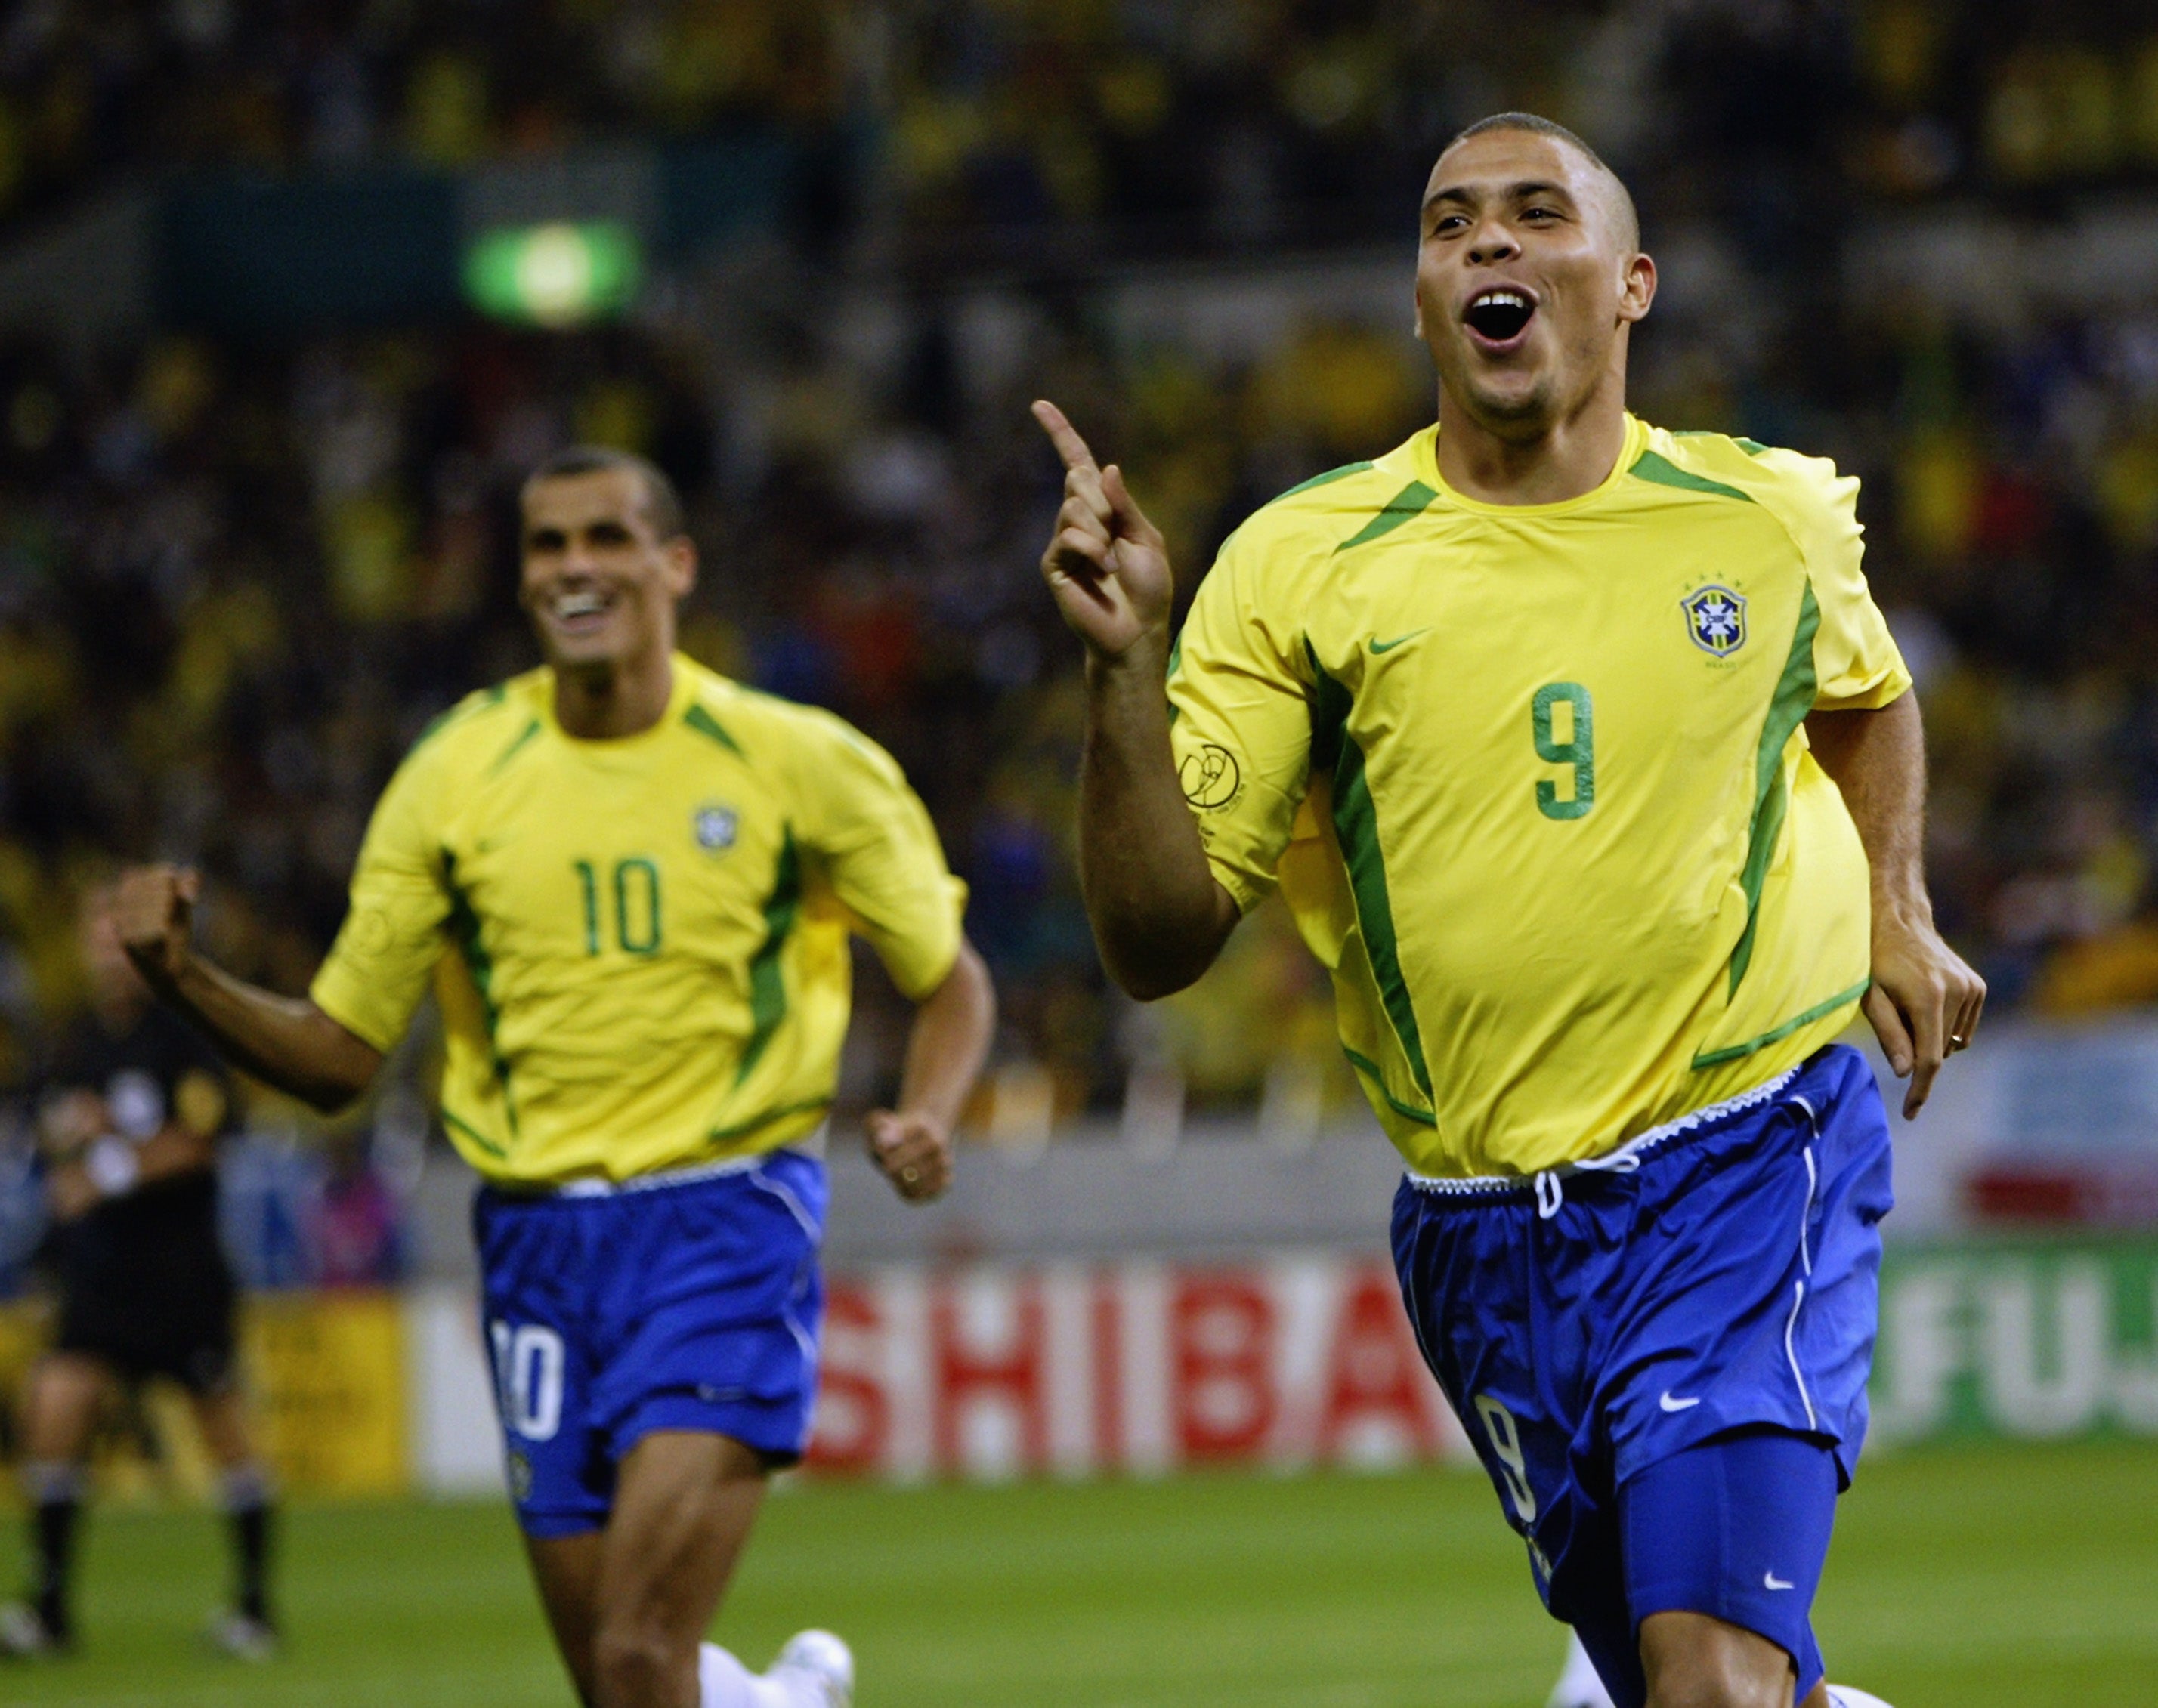 Ronaldo S Redemption Rewatching Brazil Vs Germany In The 2002 World Cup Final The Independent